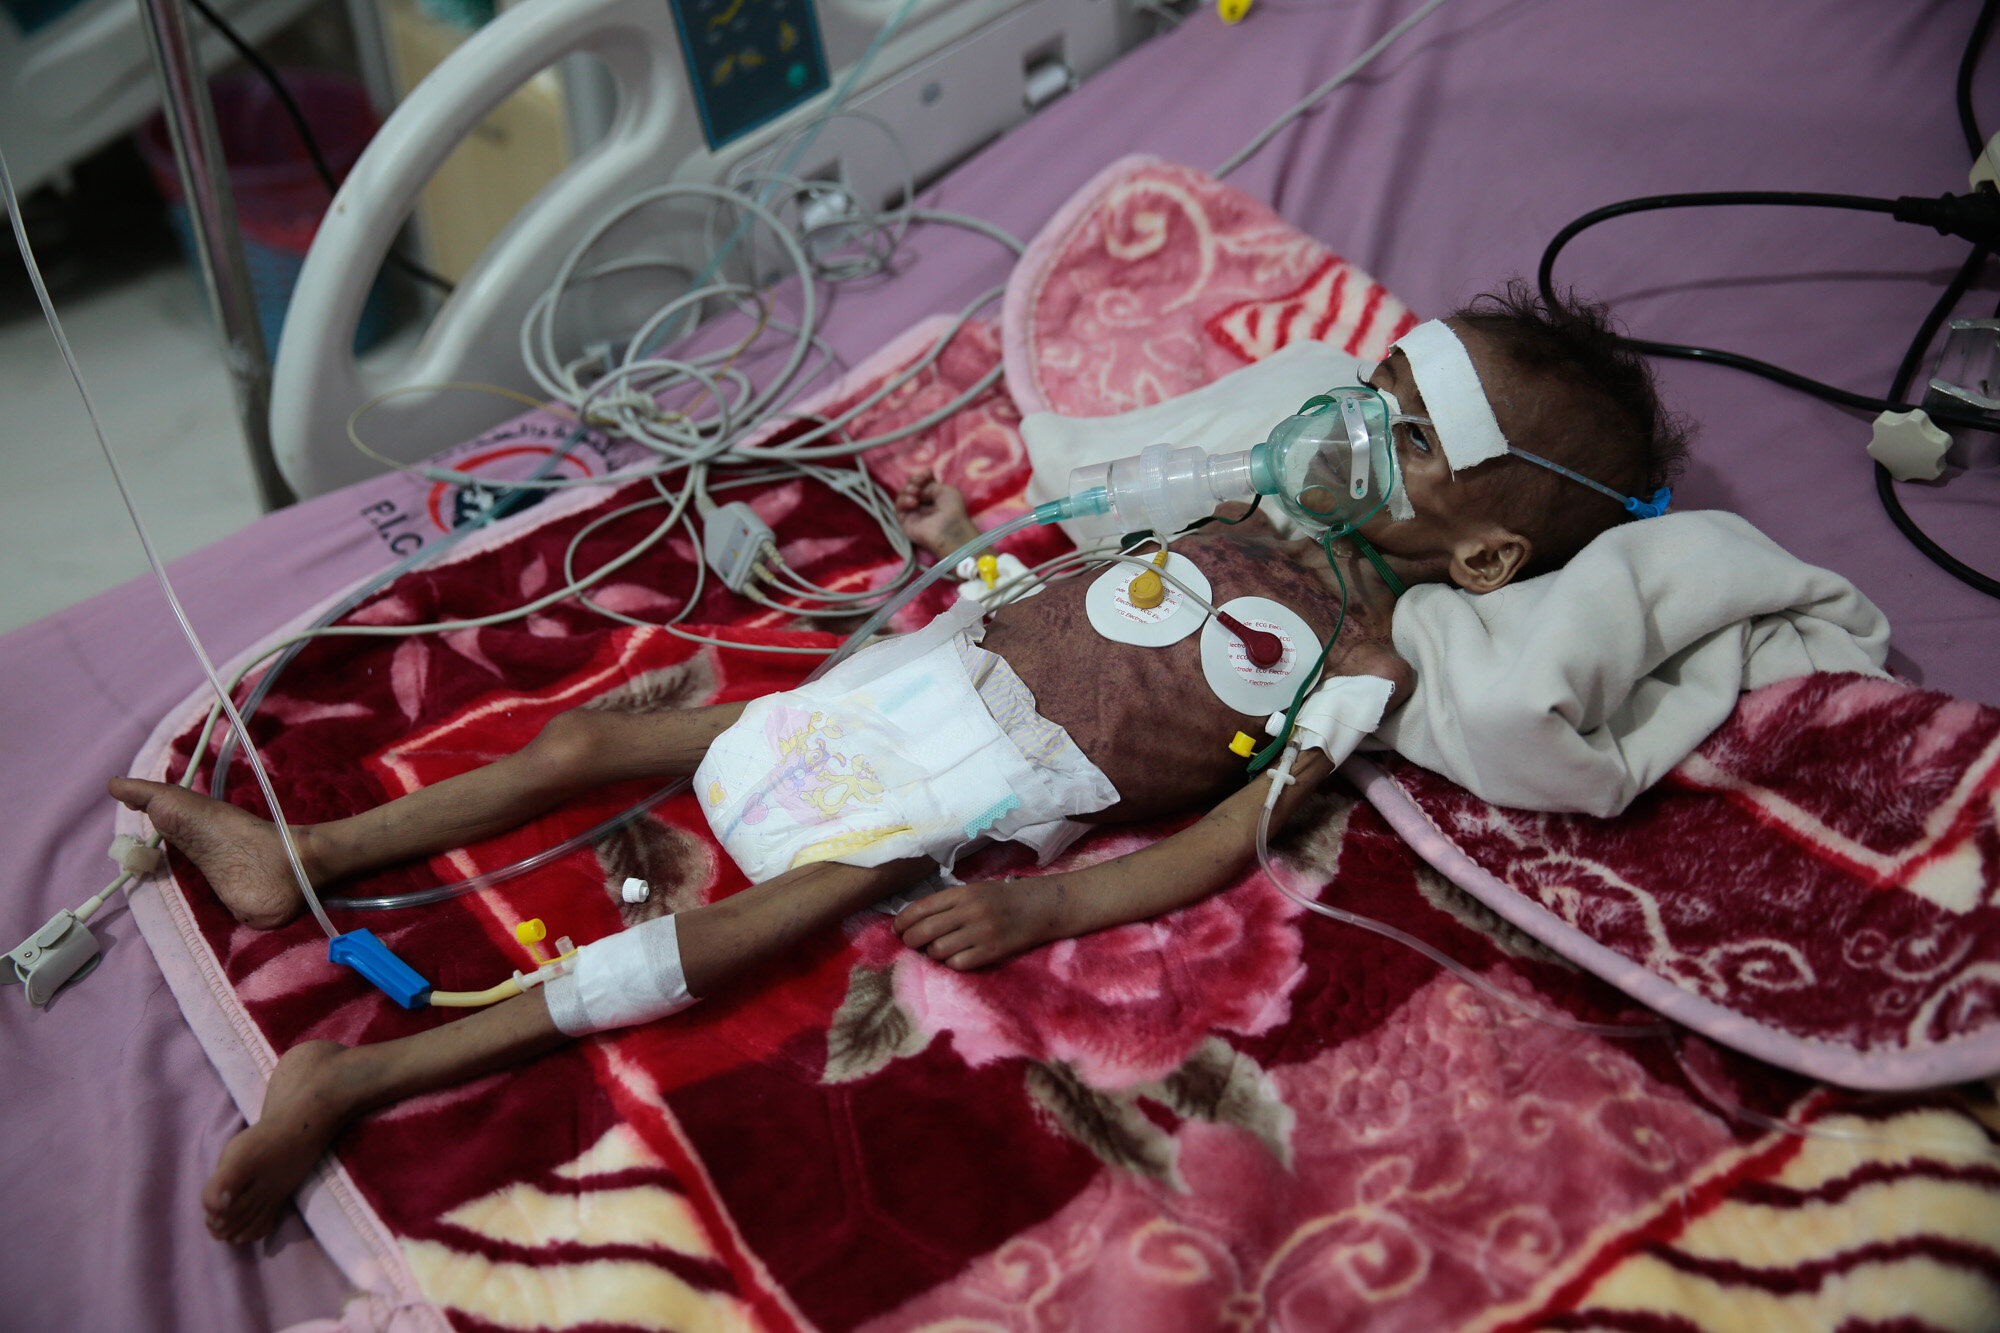  A malnourished girl, Rahmah Watheeq, receives treatment at a feeding center at Al-Sabeen hospital in Sanaa, Yemen, on Nov. 3, 2020. Two-thirds of Yemen's population of about 28 million people are hungry, and nearly 1.5 million families currently rel